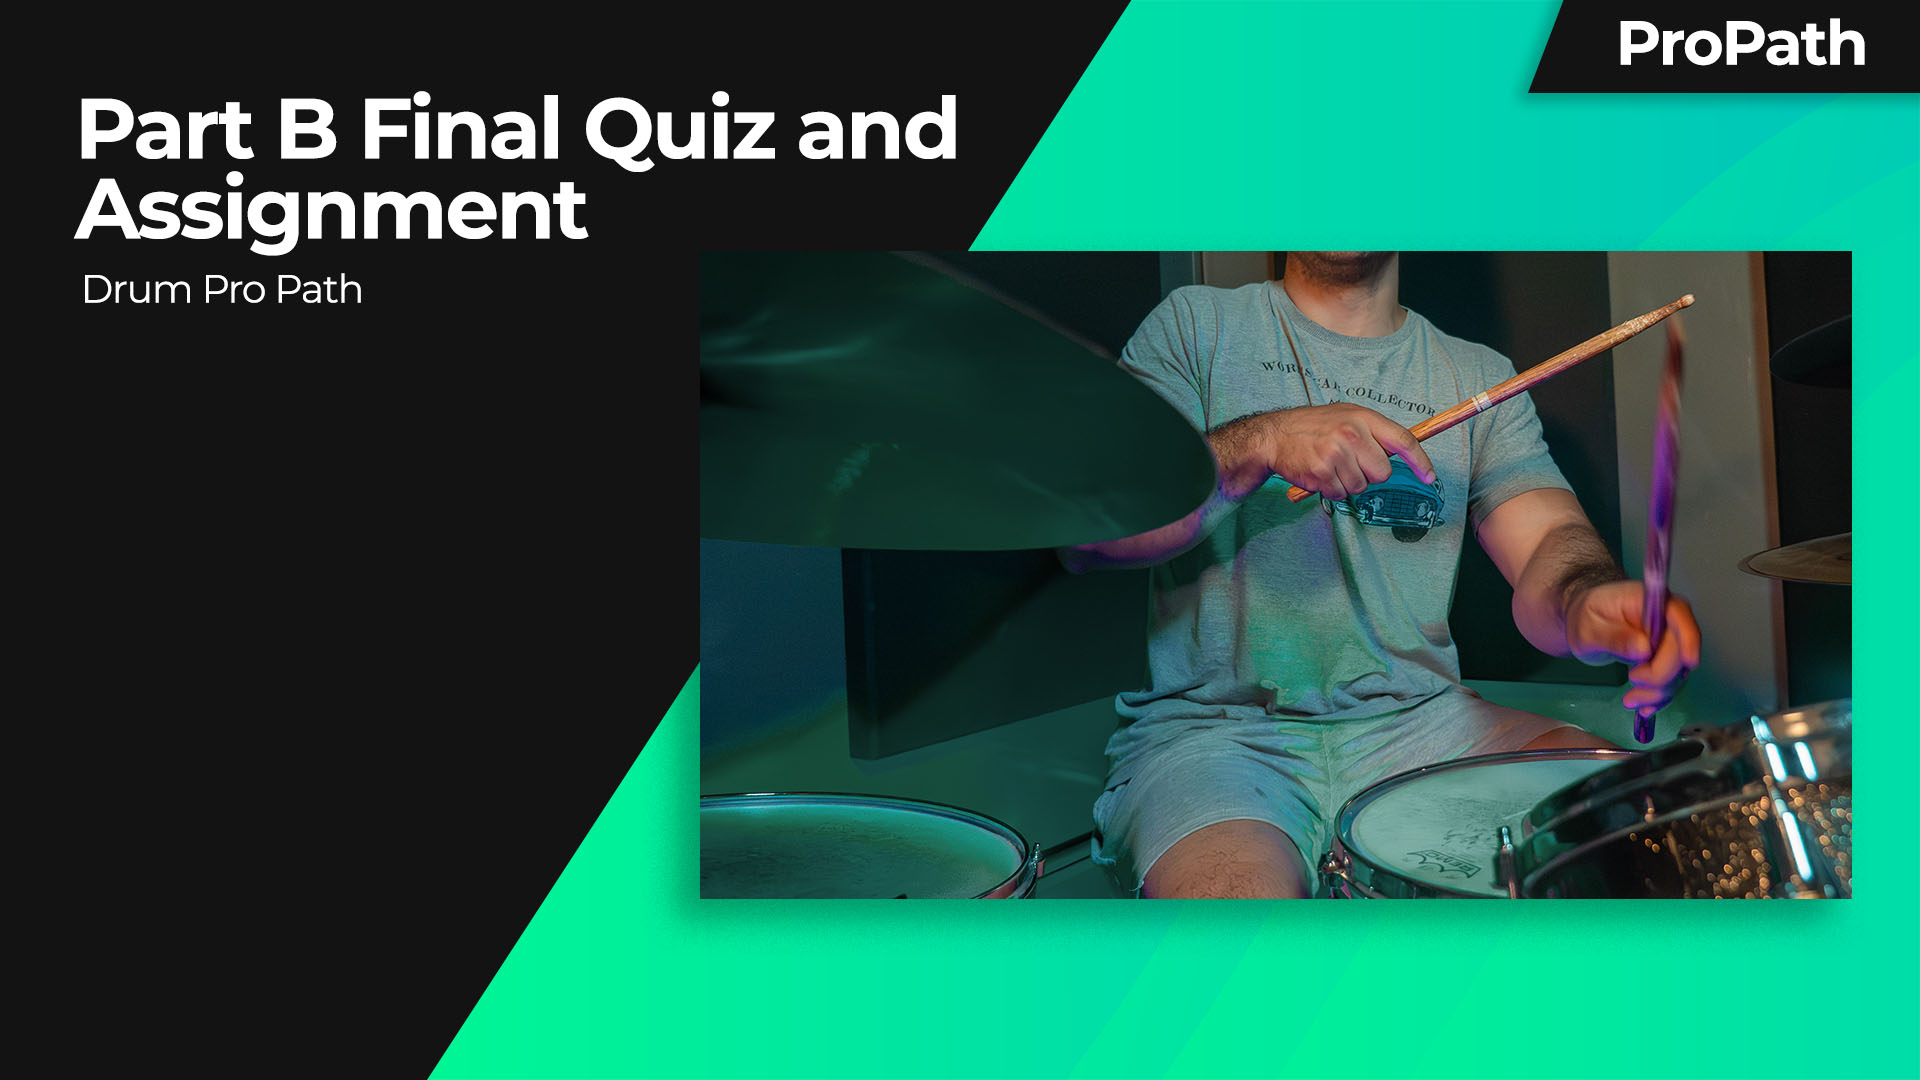 Drum Pro Path: Part B Final Quiz and Assignment